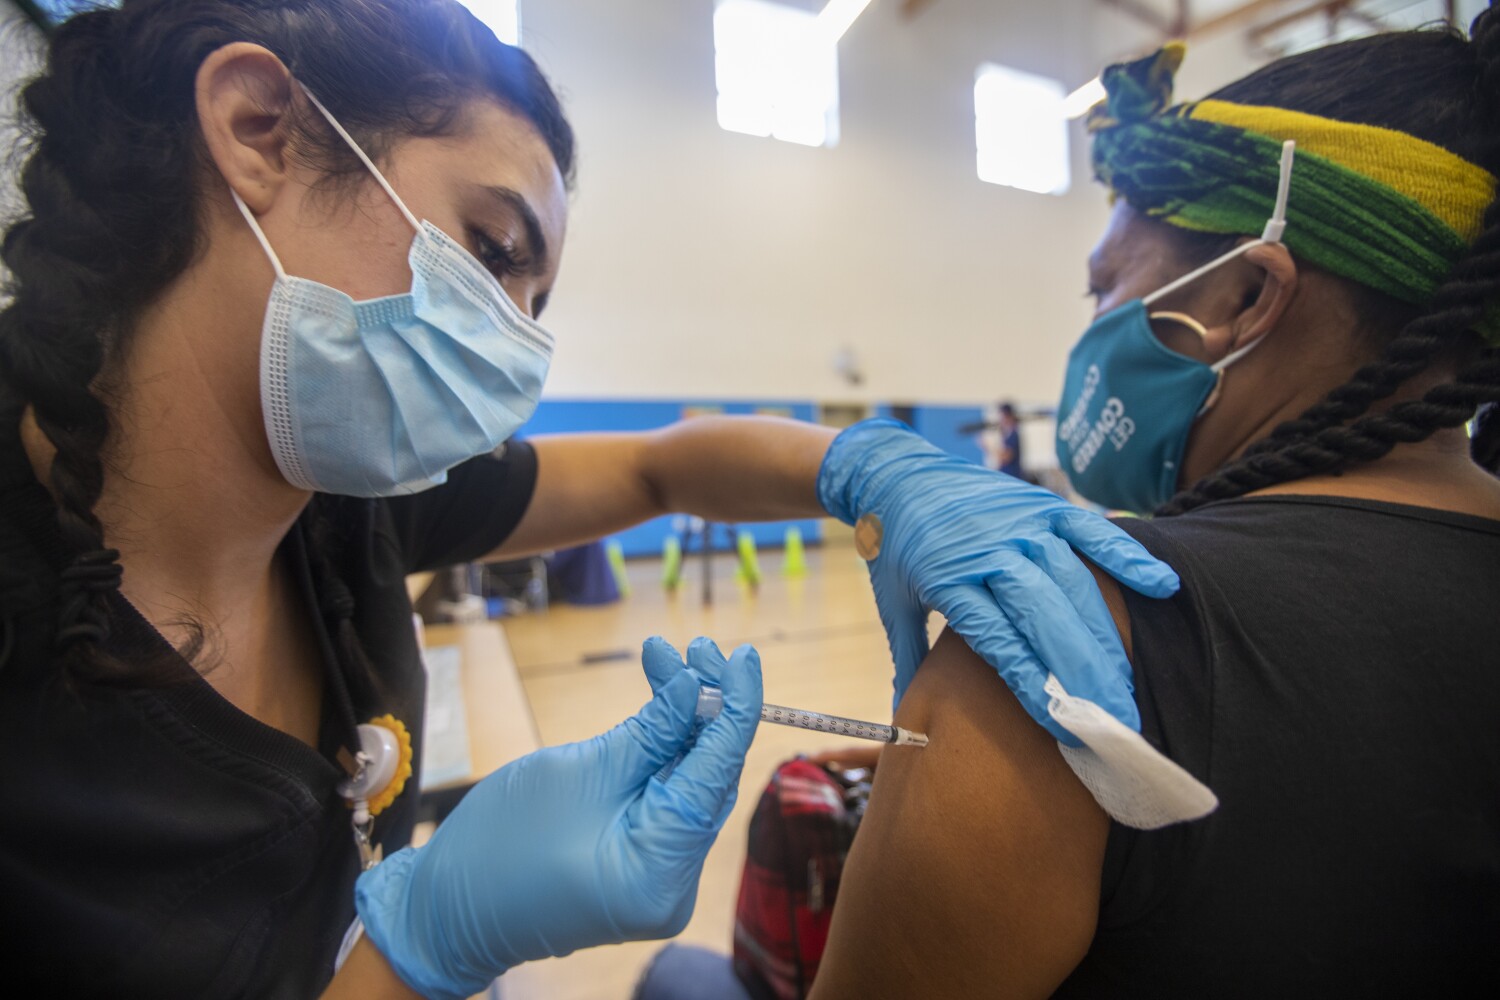 California sees significant rise in vaccinations as employers issue mandates